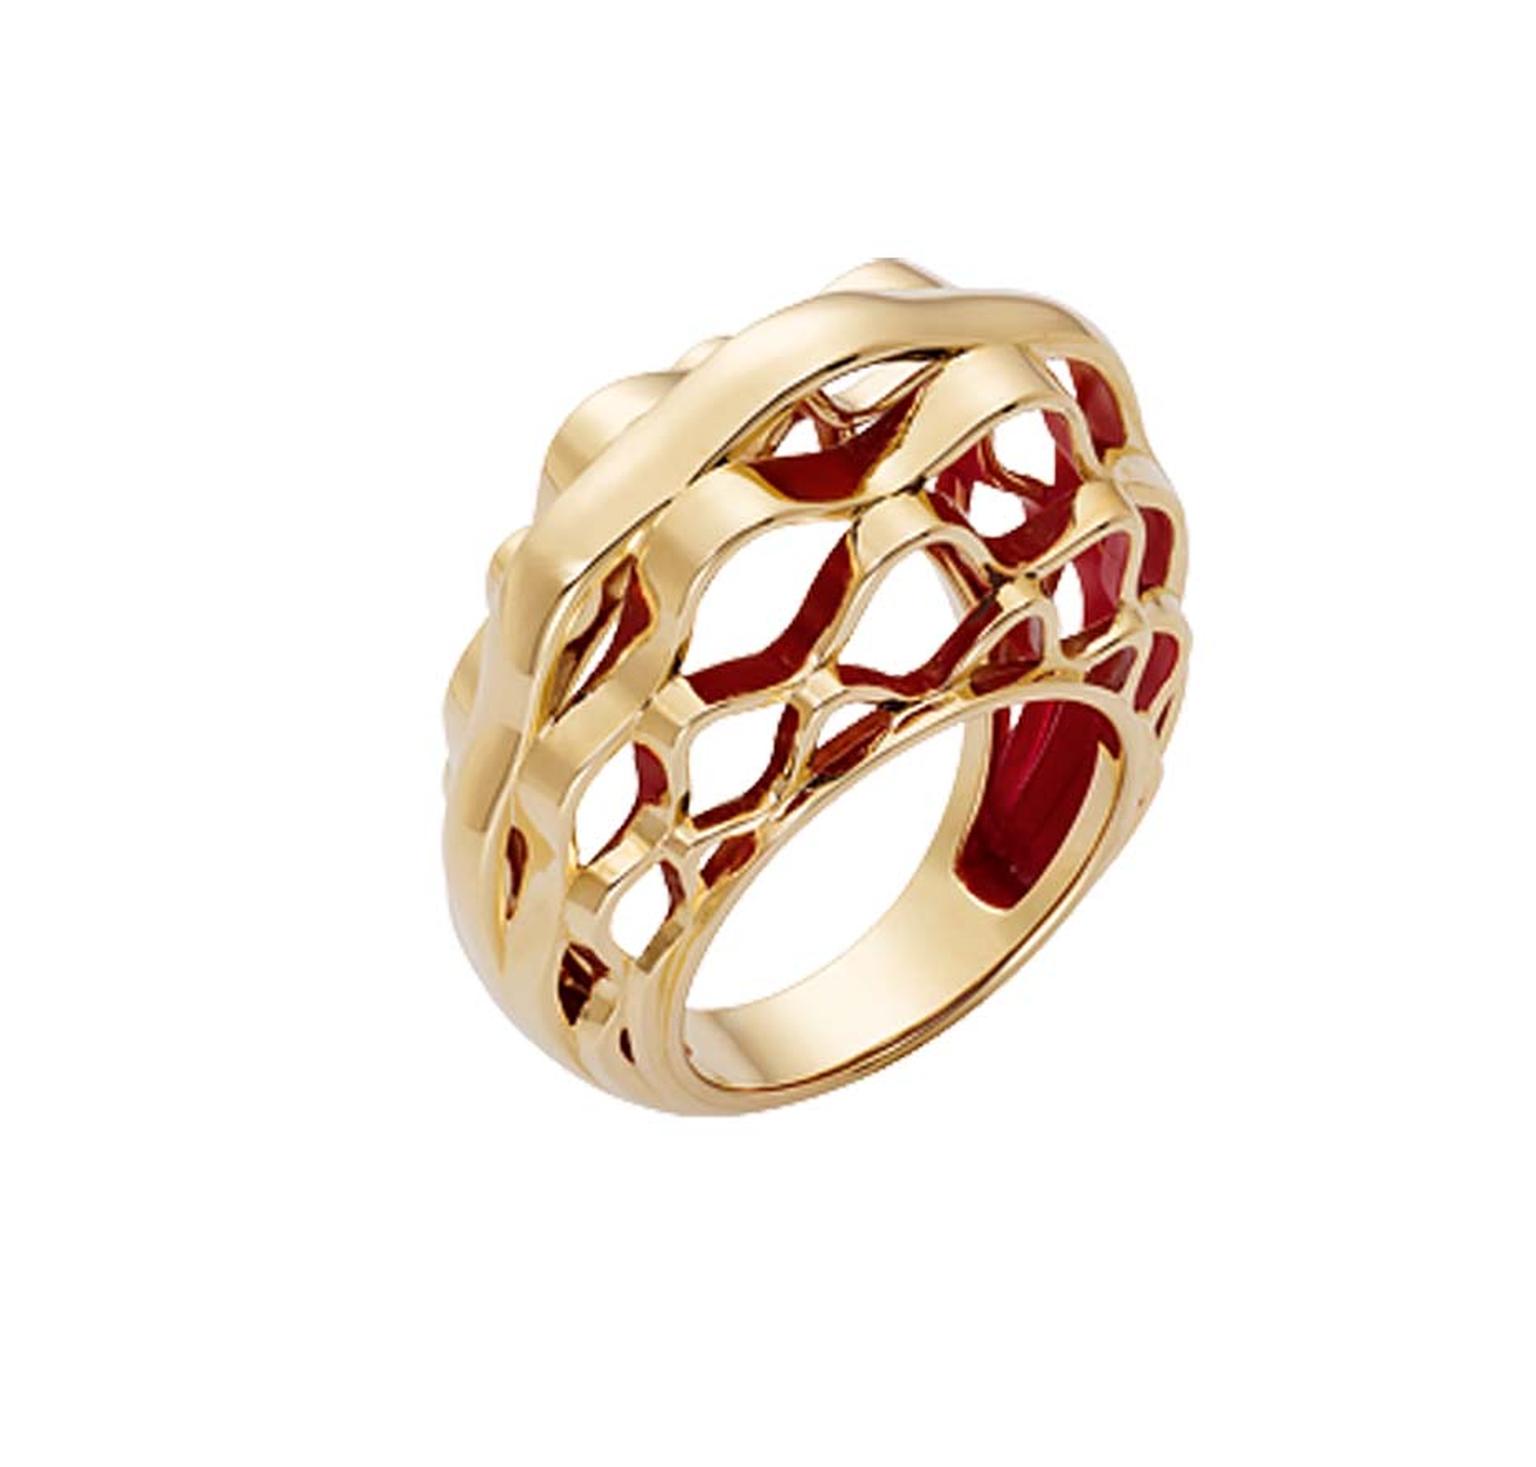 The metalwork of the glass dome of the Grand Palais is interpreted by Cartier in this dramatic ring that resembles golden basketwork - one of the new Paris Nouvelle Vague jewels.